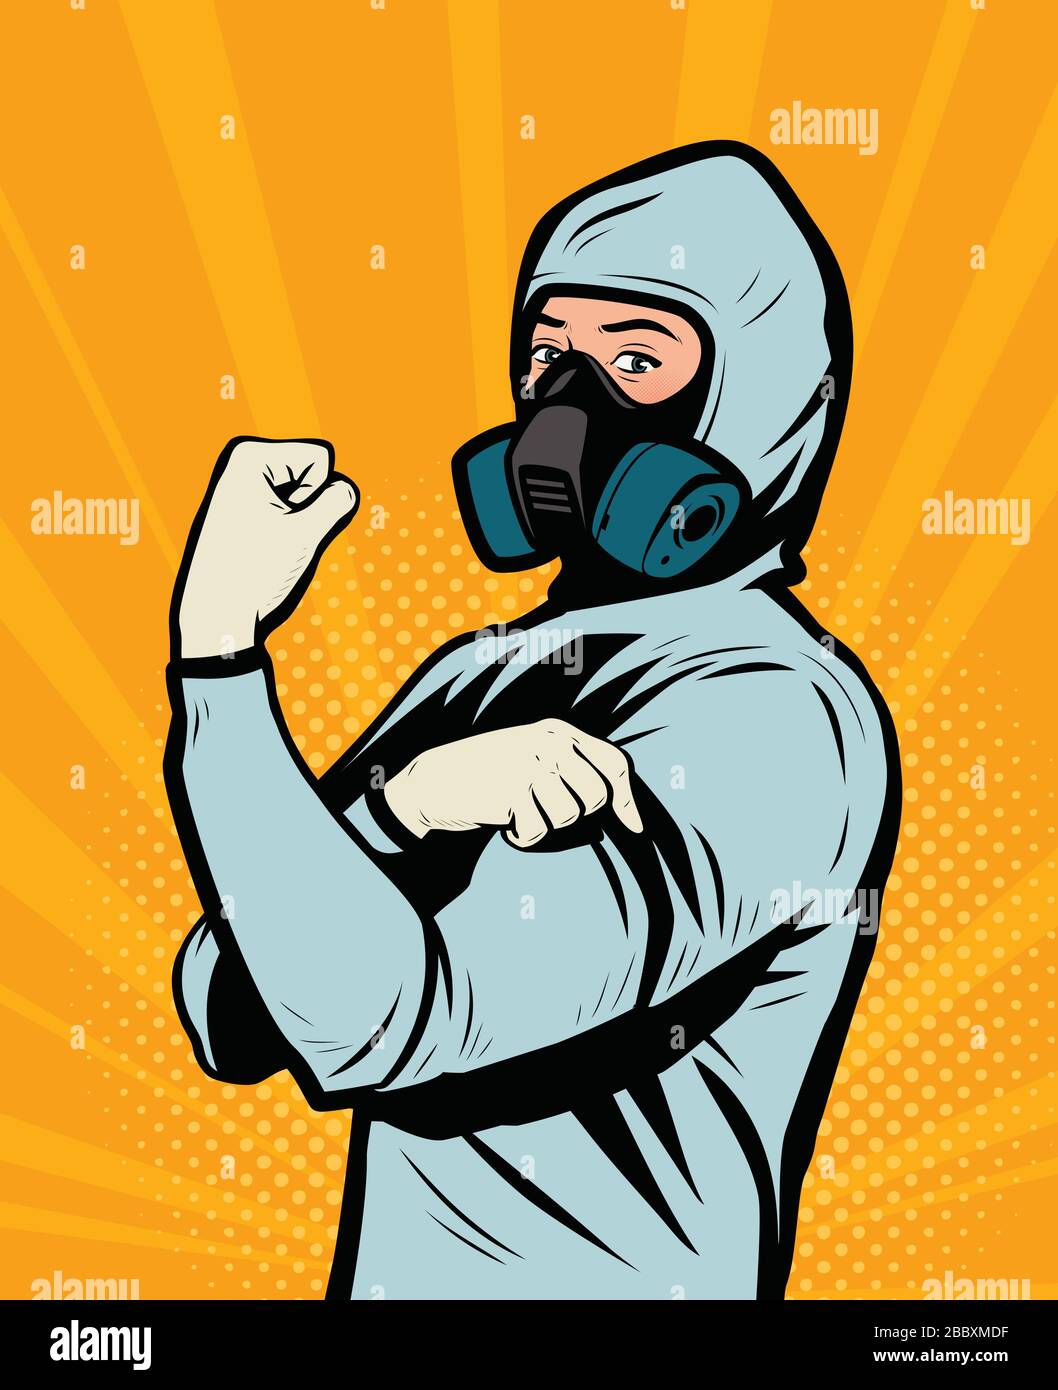 Human in chemical protective suit. Retro comic pop art vector illustration Stock Vector